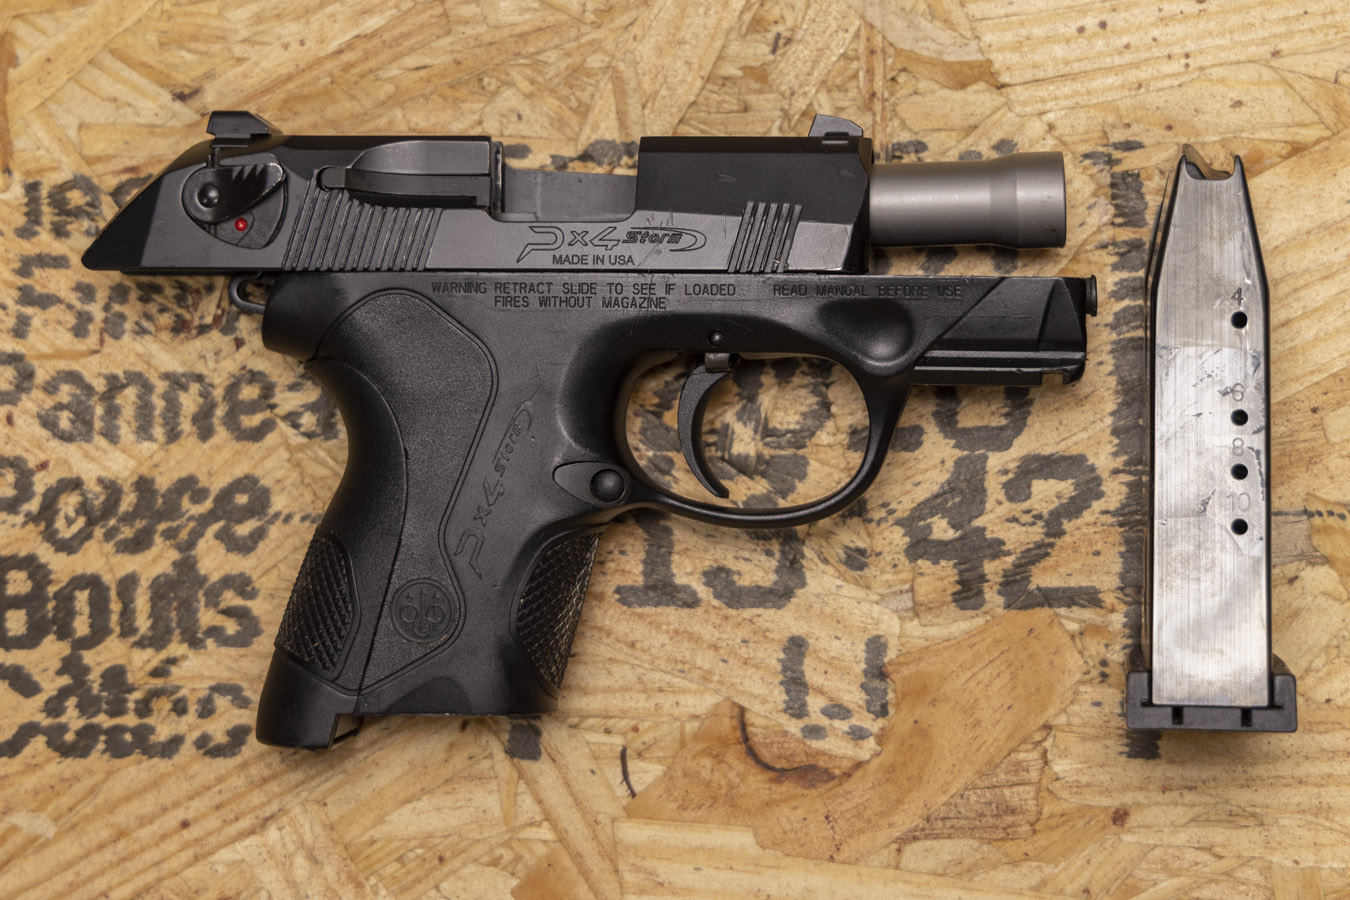 PX4 STORM 40SW POLICE TRADE-IN PISTOL